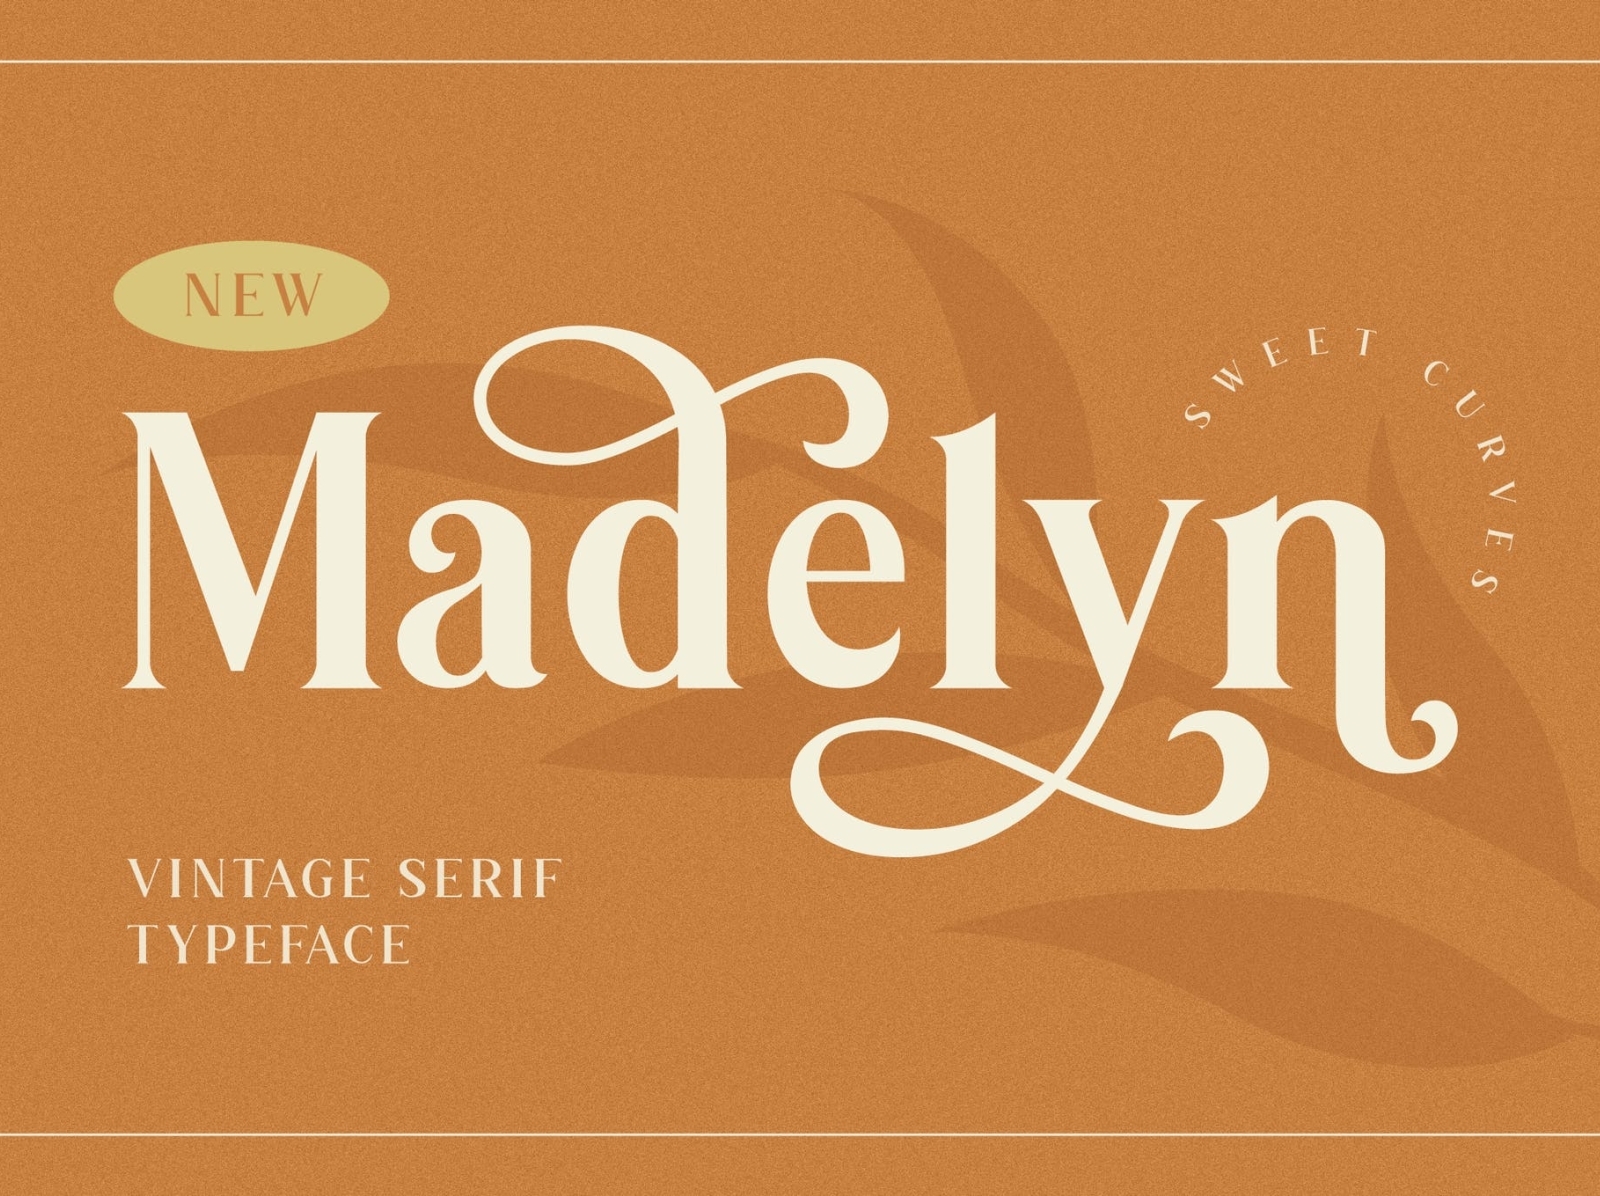 Madelyn Vintage Serif Font by Display Fonts on Dribbble